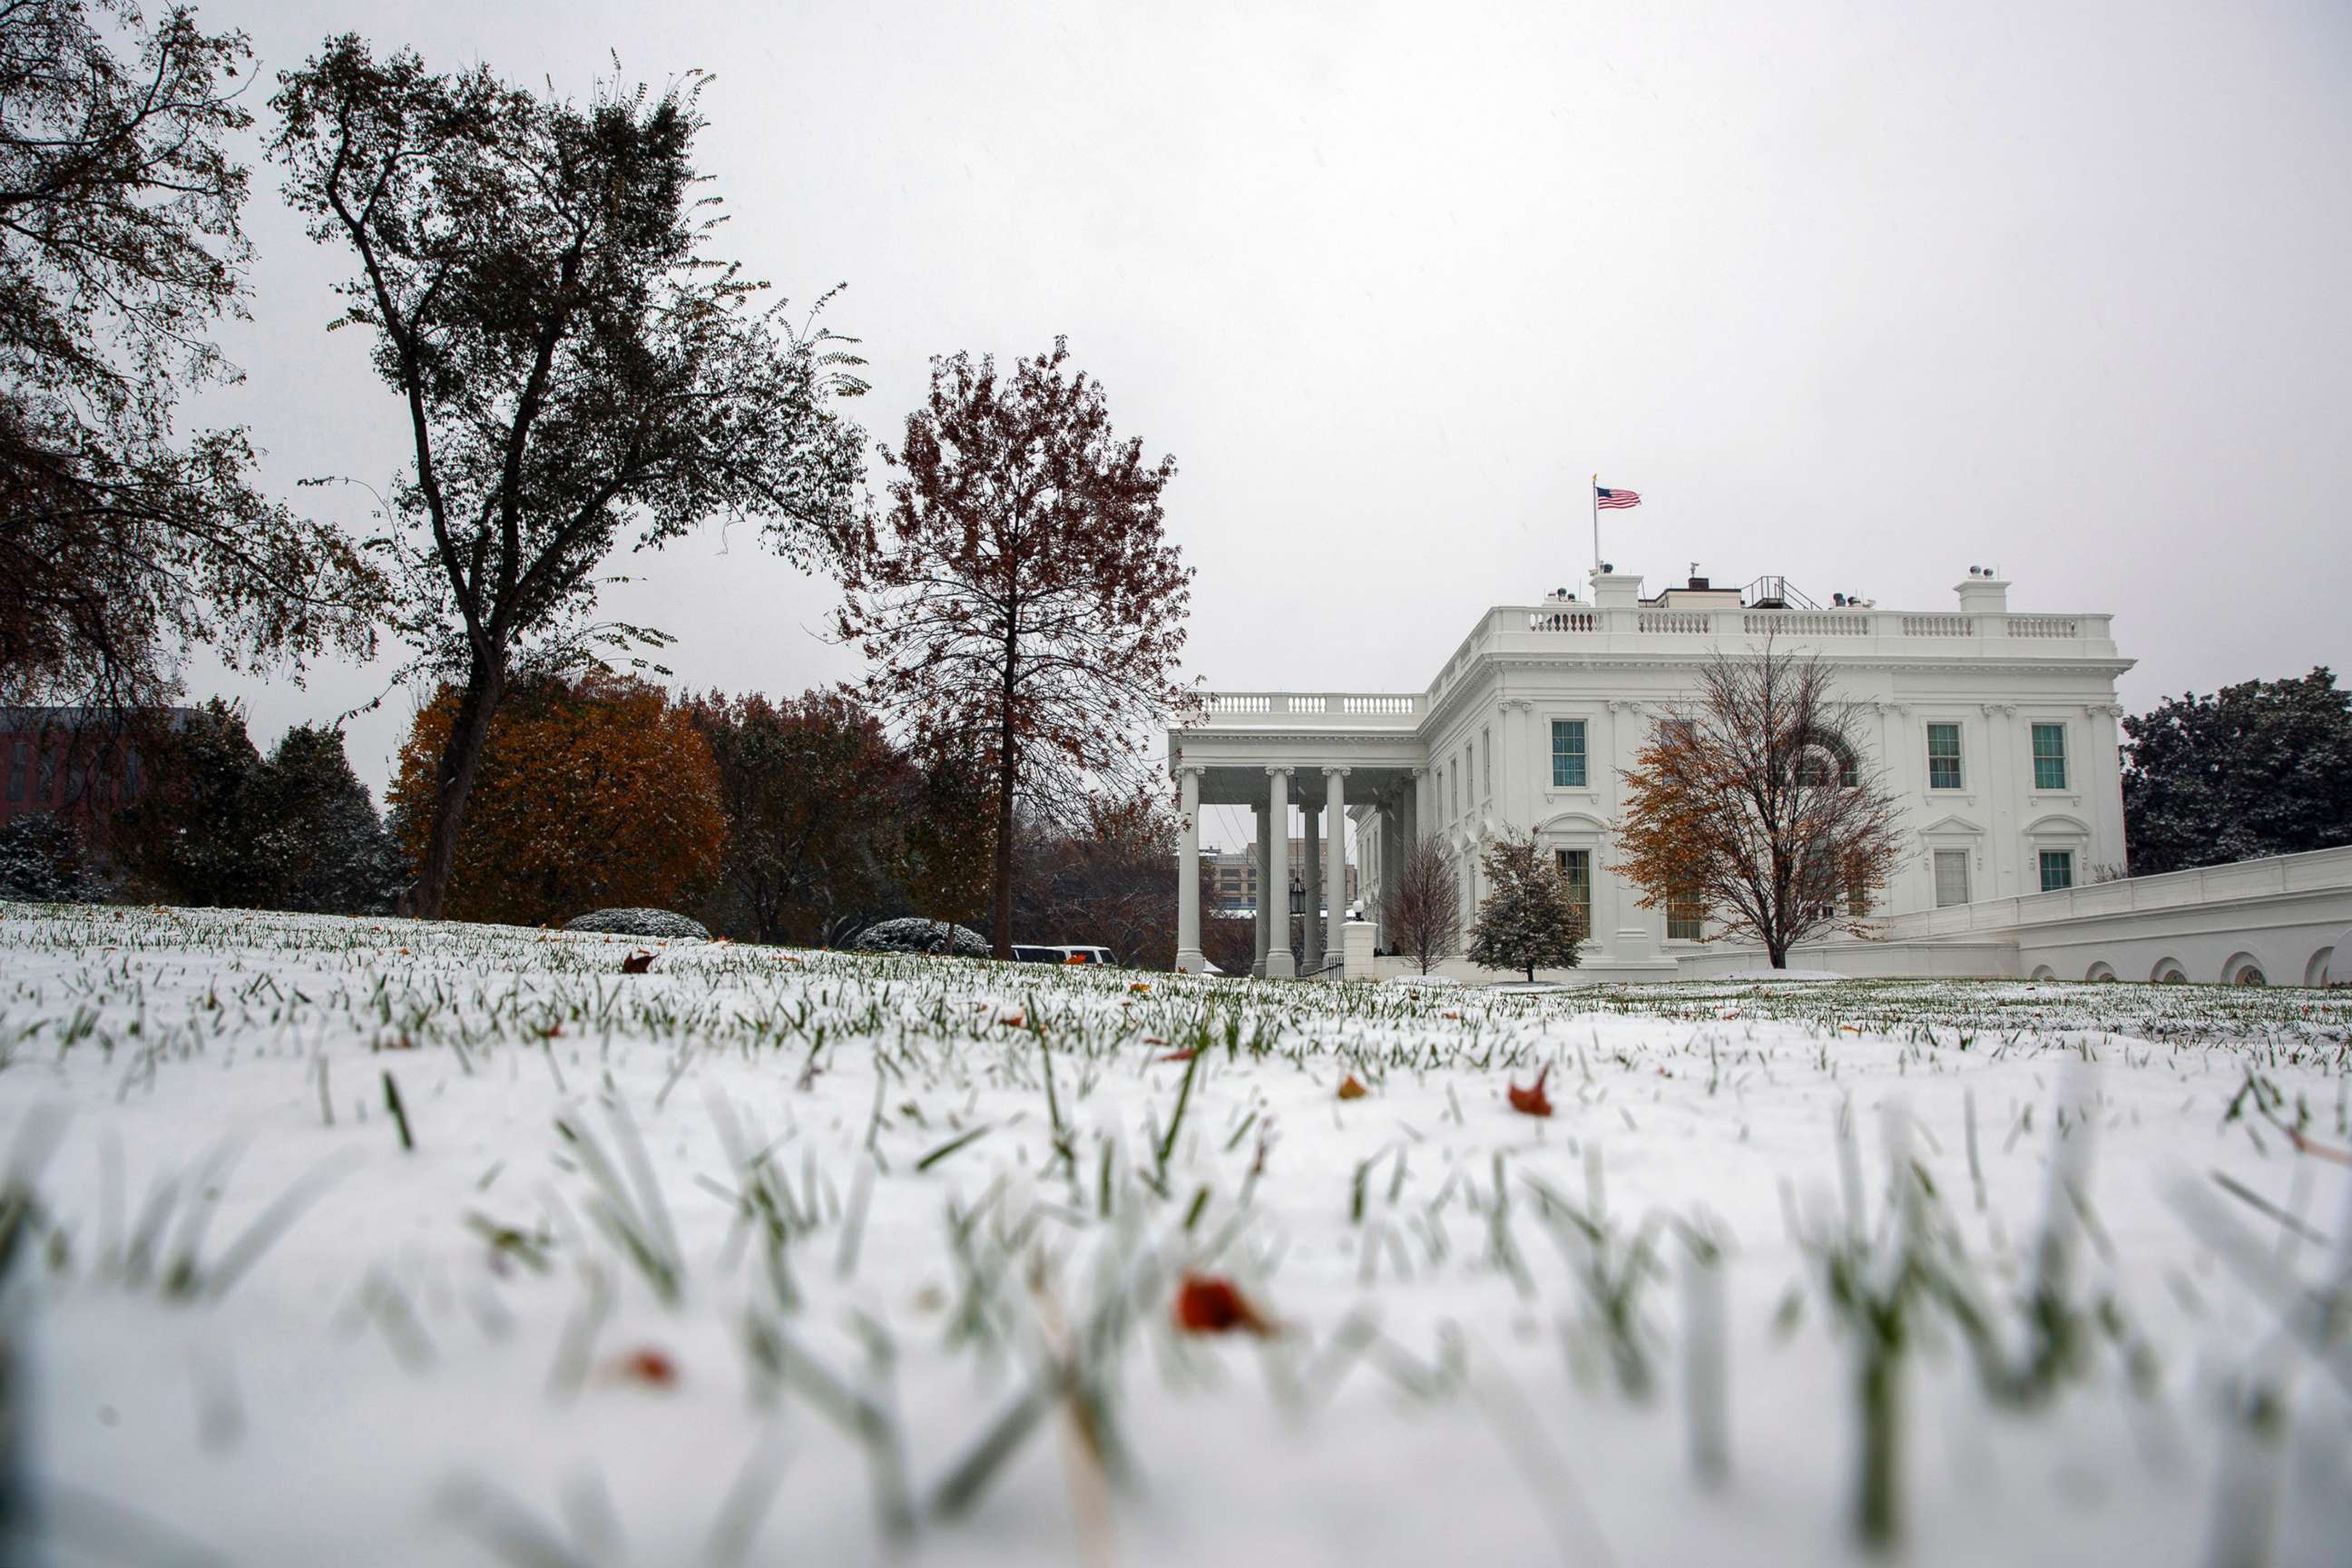 PHOTO: Snow covers the grass outside the White House, Nov. 15, 2018, in Washington.